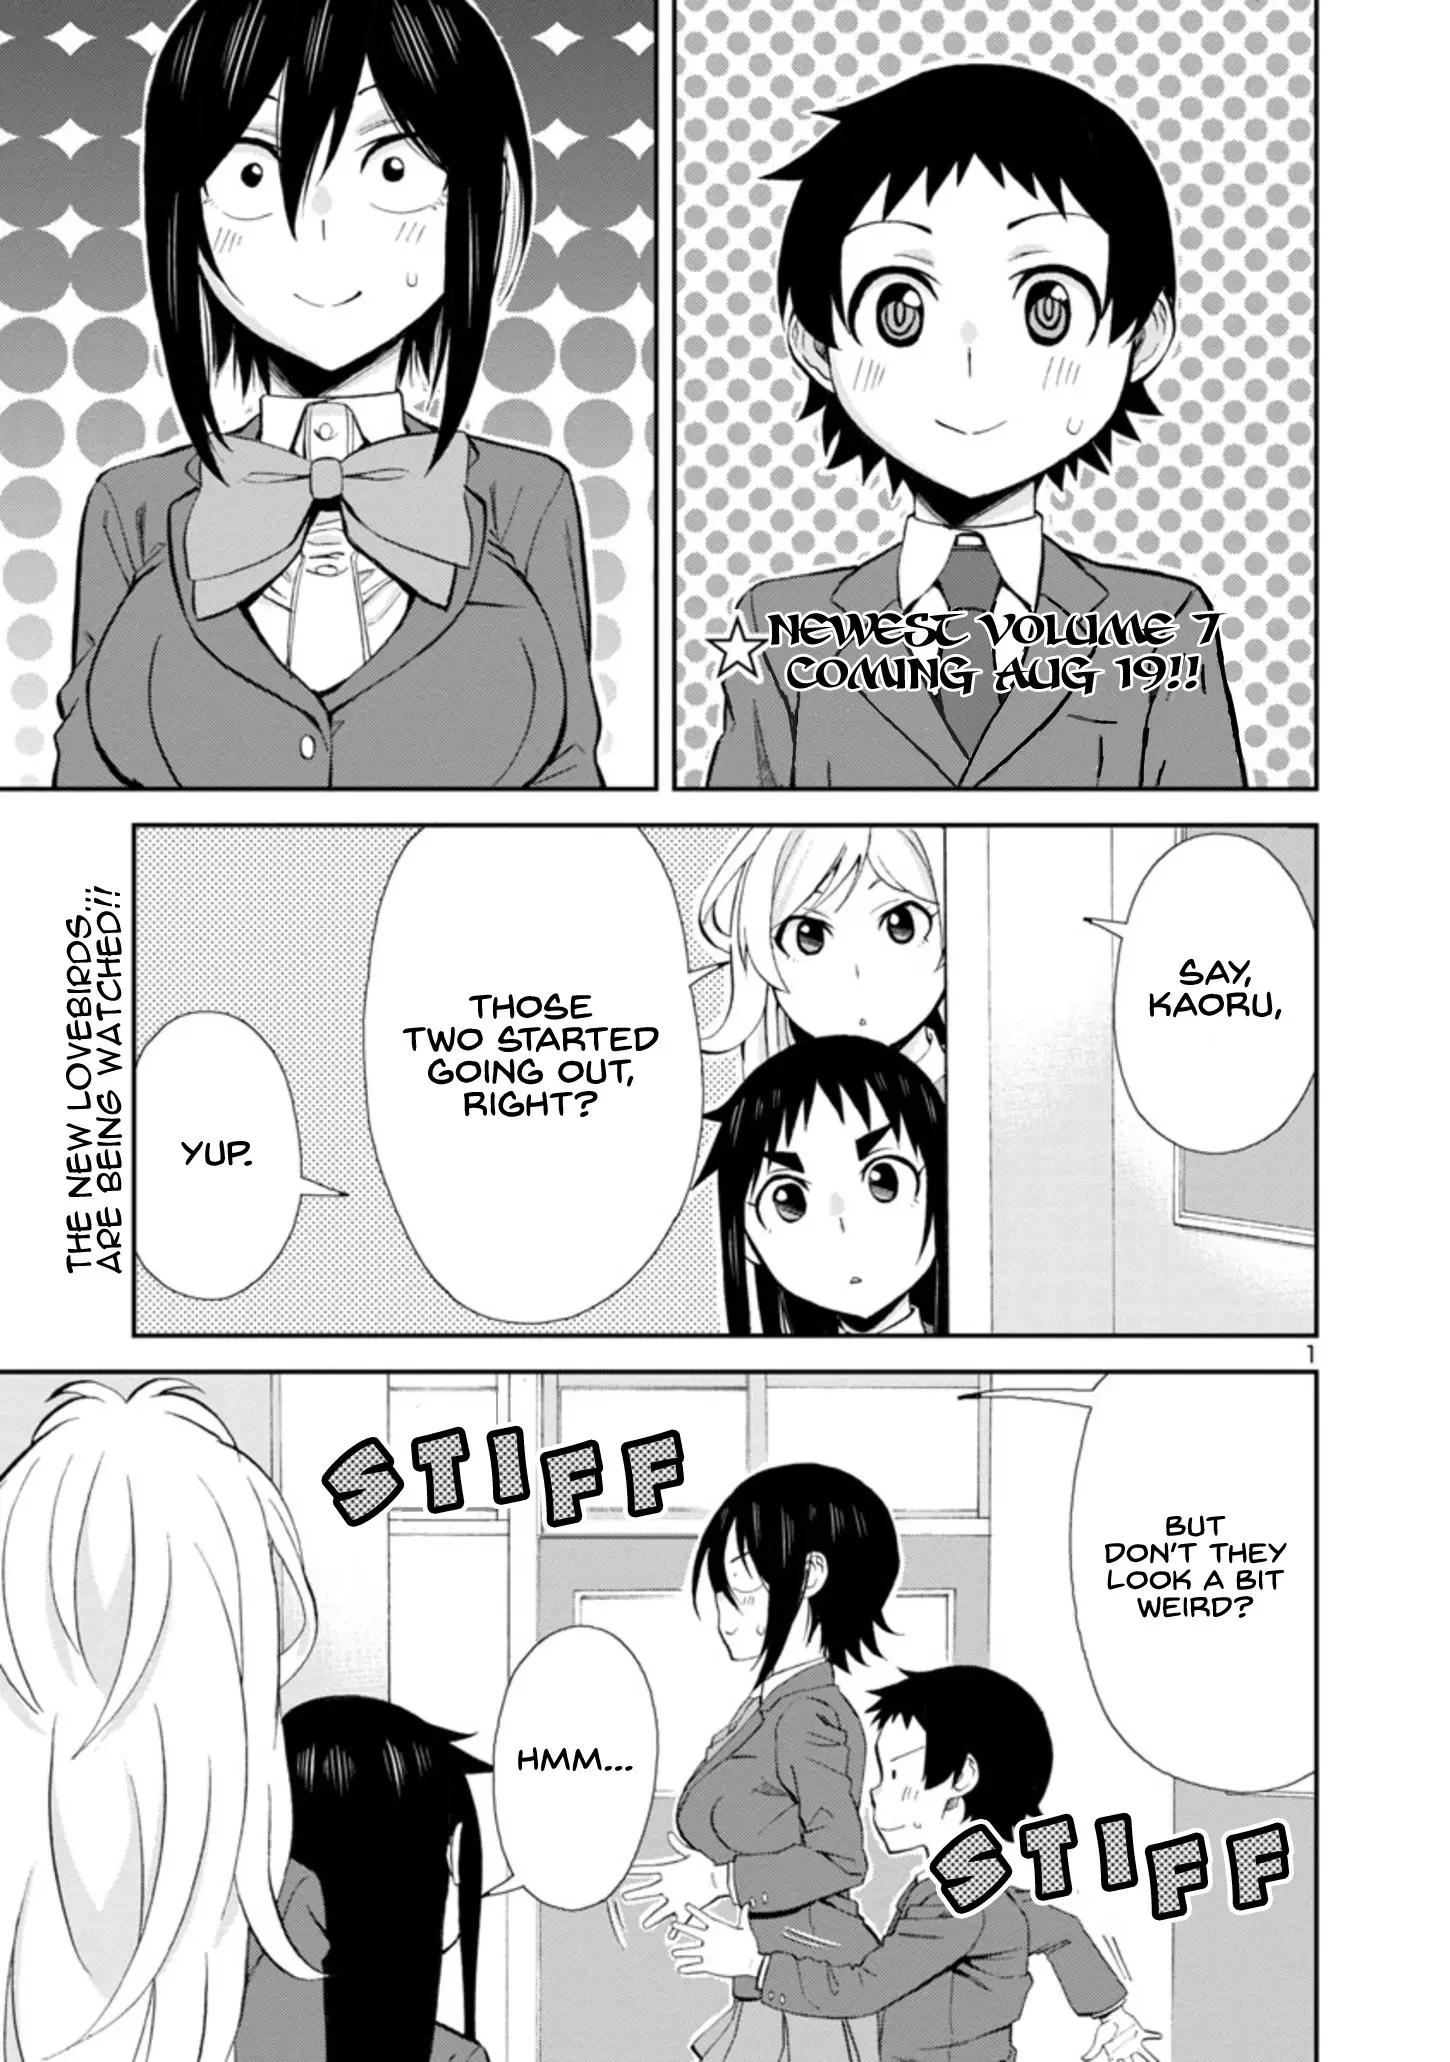 Hitomi-Chan Is Shy With Strangers - 86 page 1-82950758